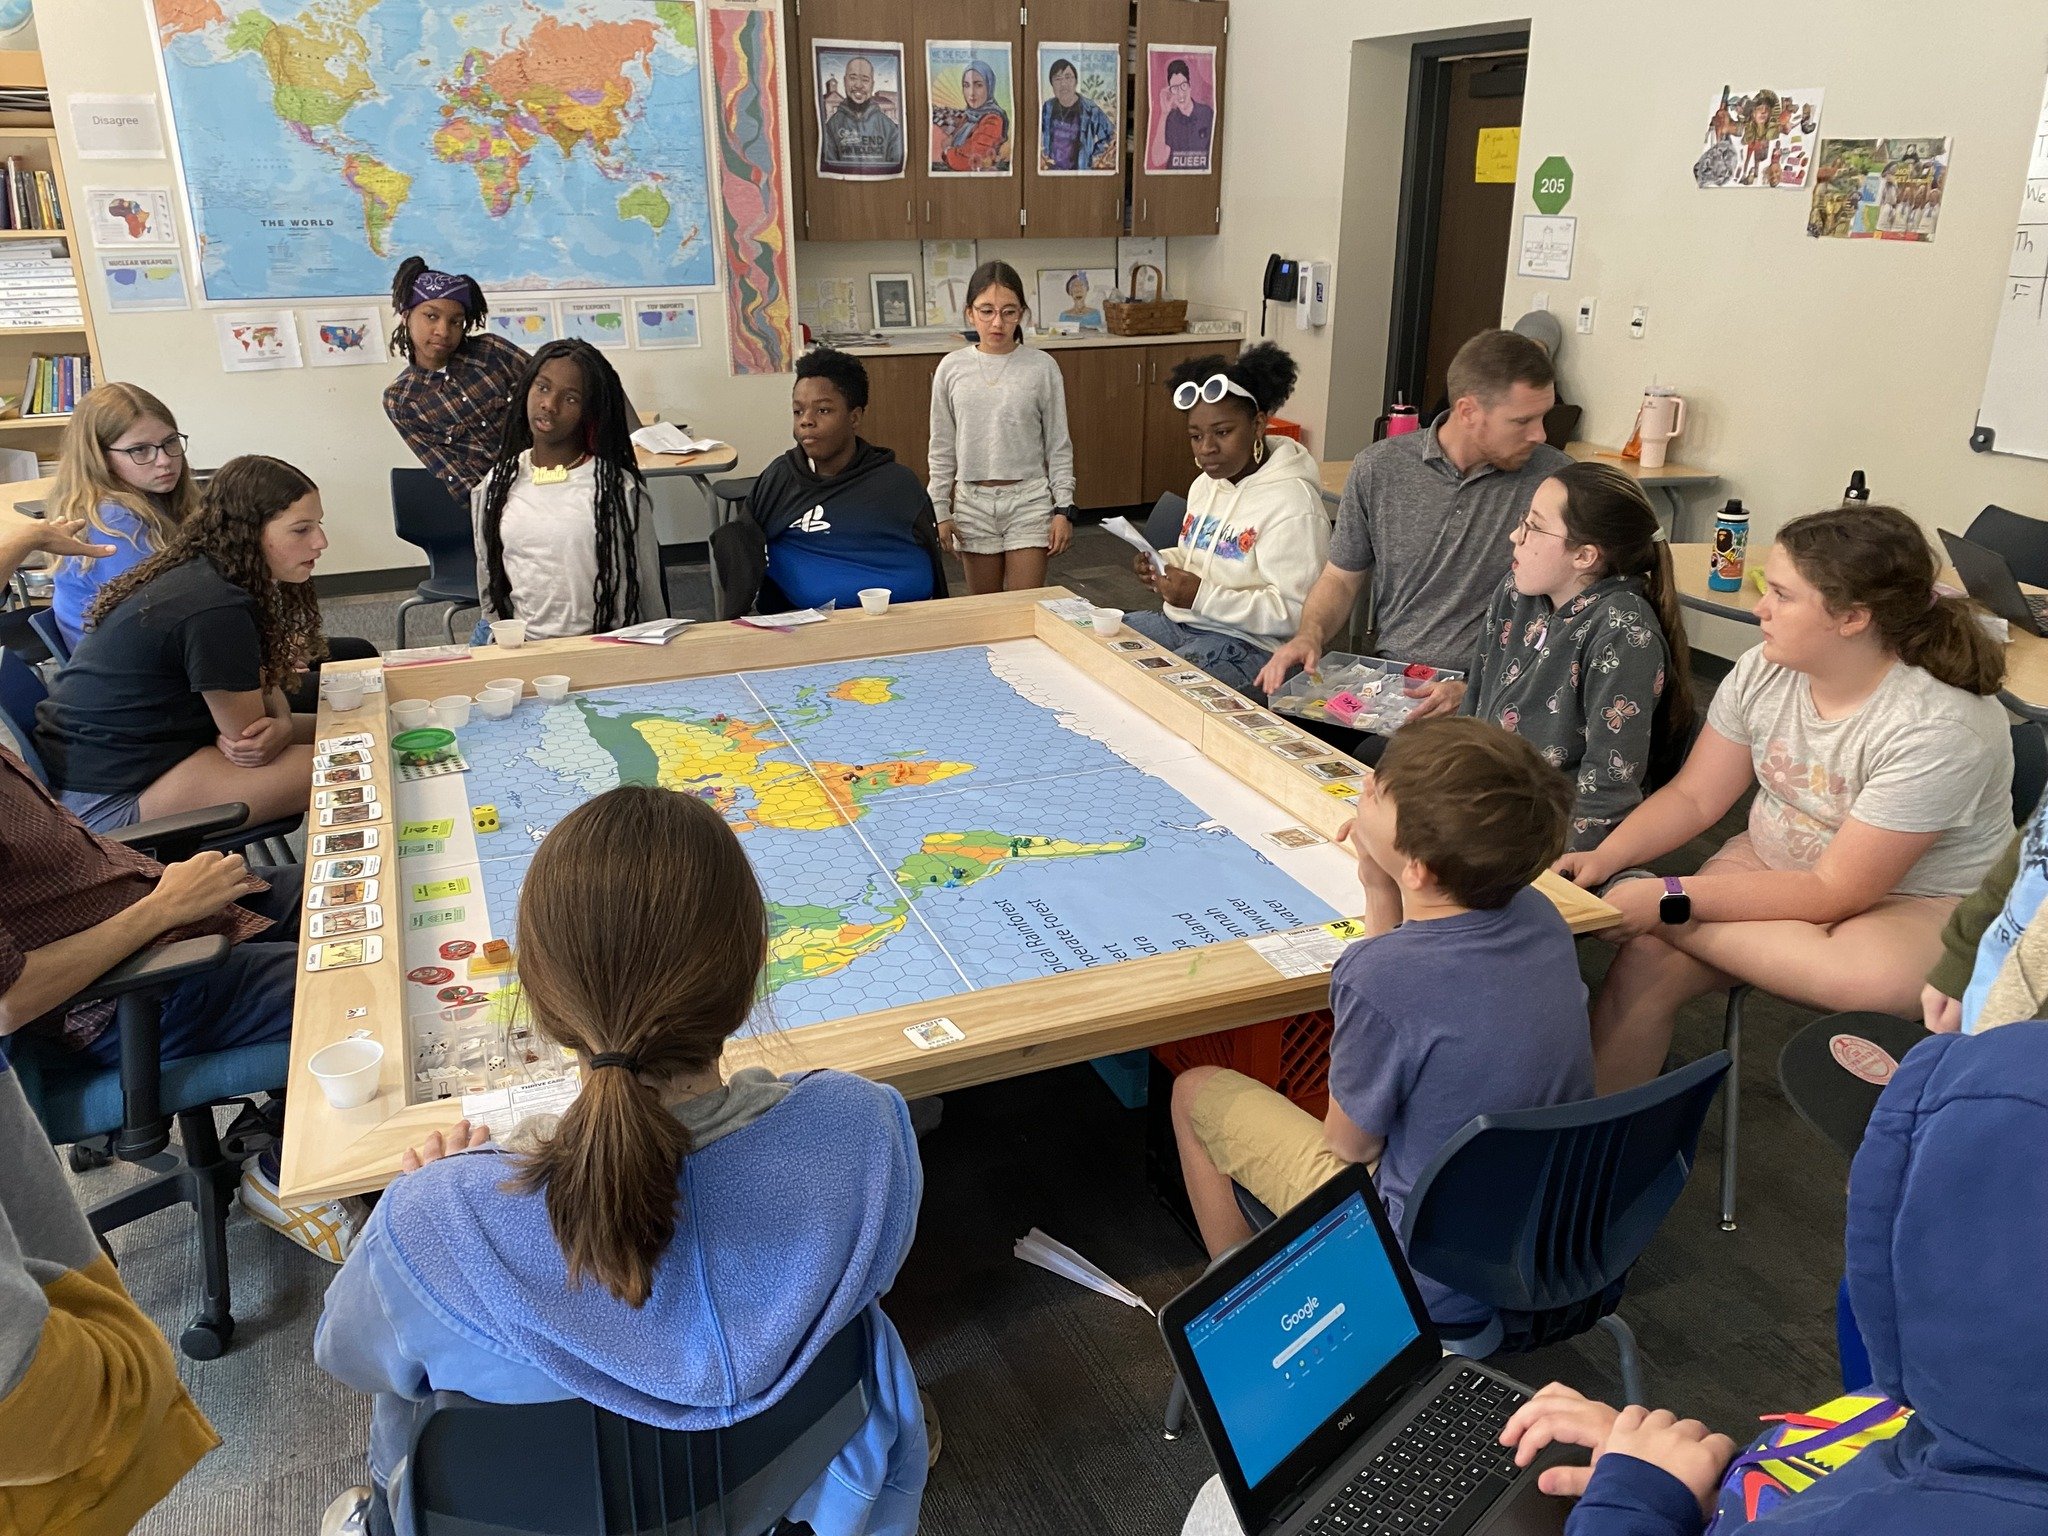 Can you develop a thriving civilization? 🗺️That's the question 6th Grade Cultural Literacy classes went head to head to answer this week. 

&quot;Thrive Civilization&quot; is a strategy game that issues players a challenge: begin as hunter-gatherers